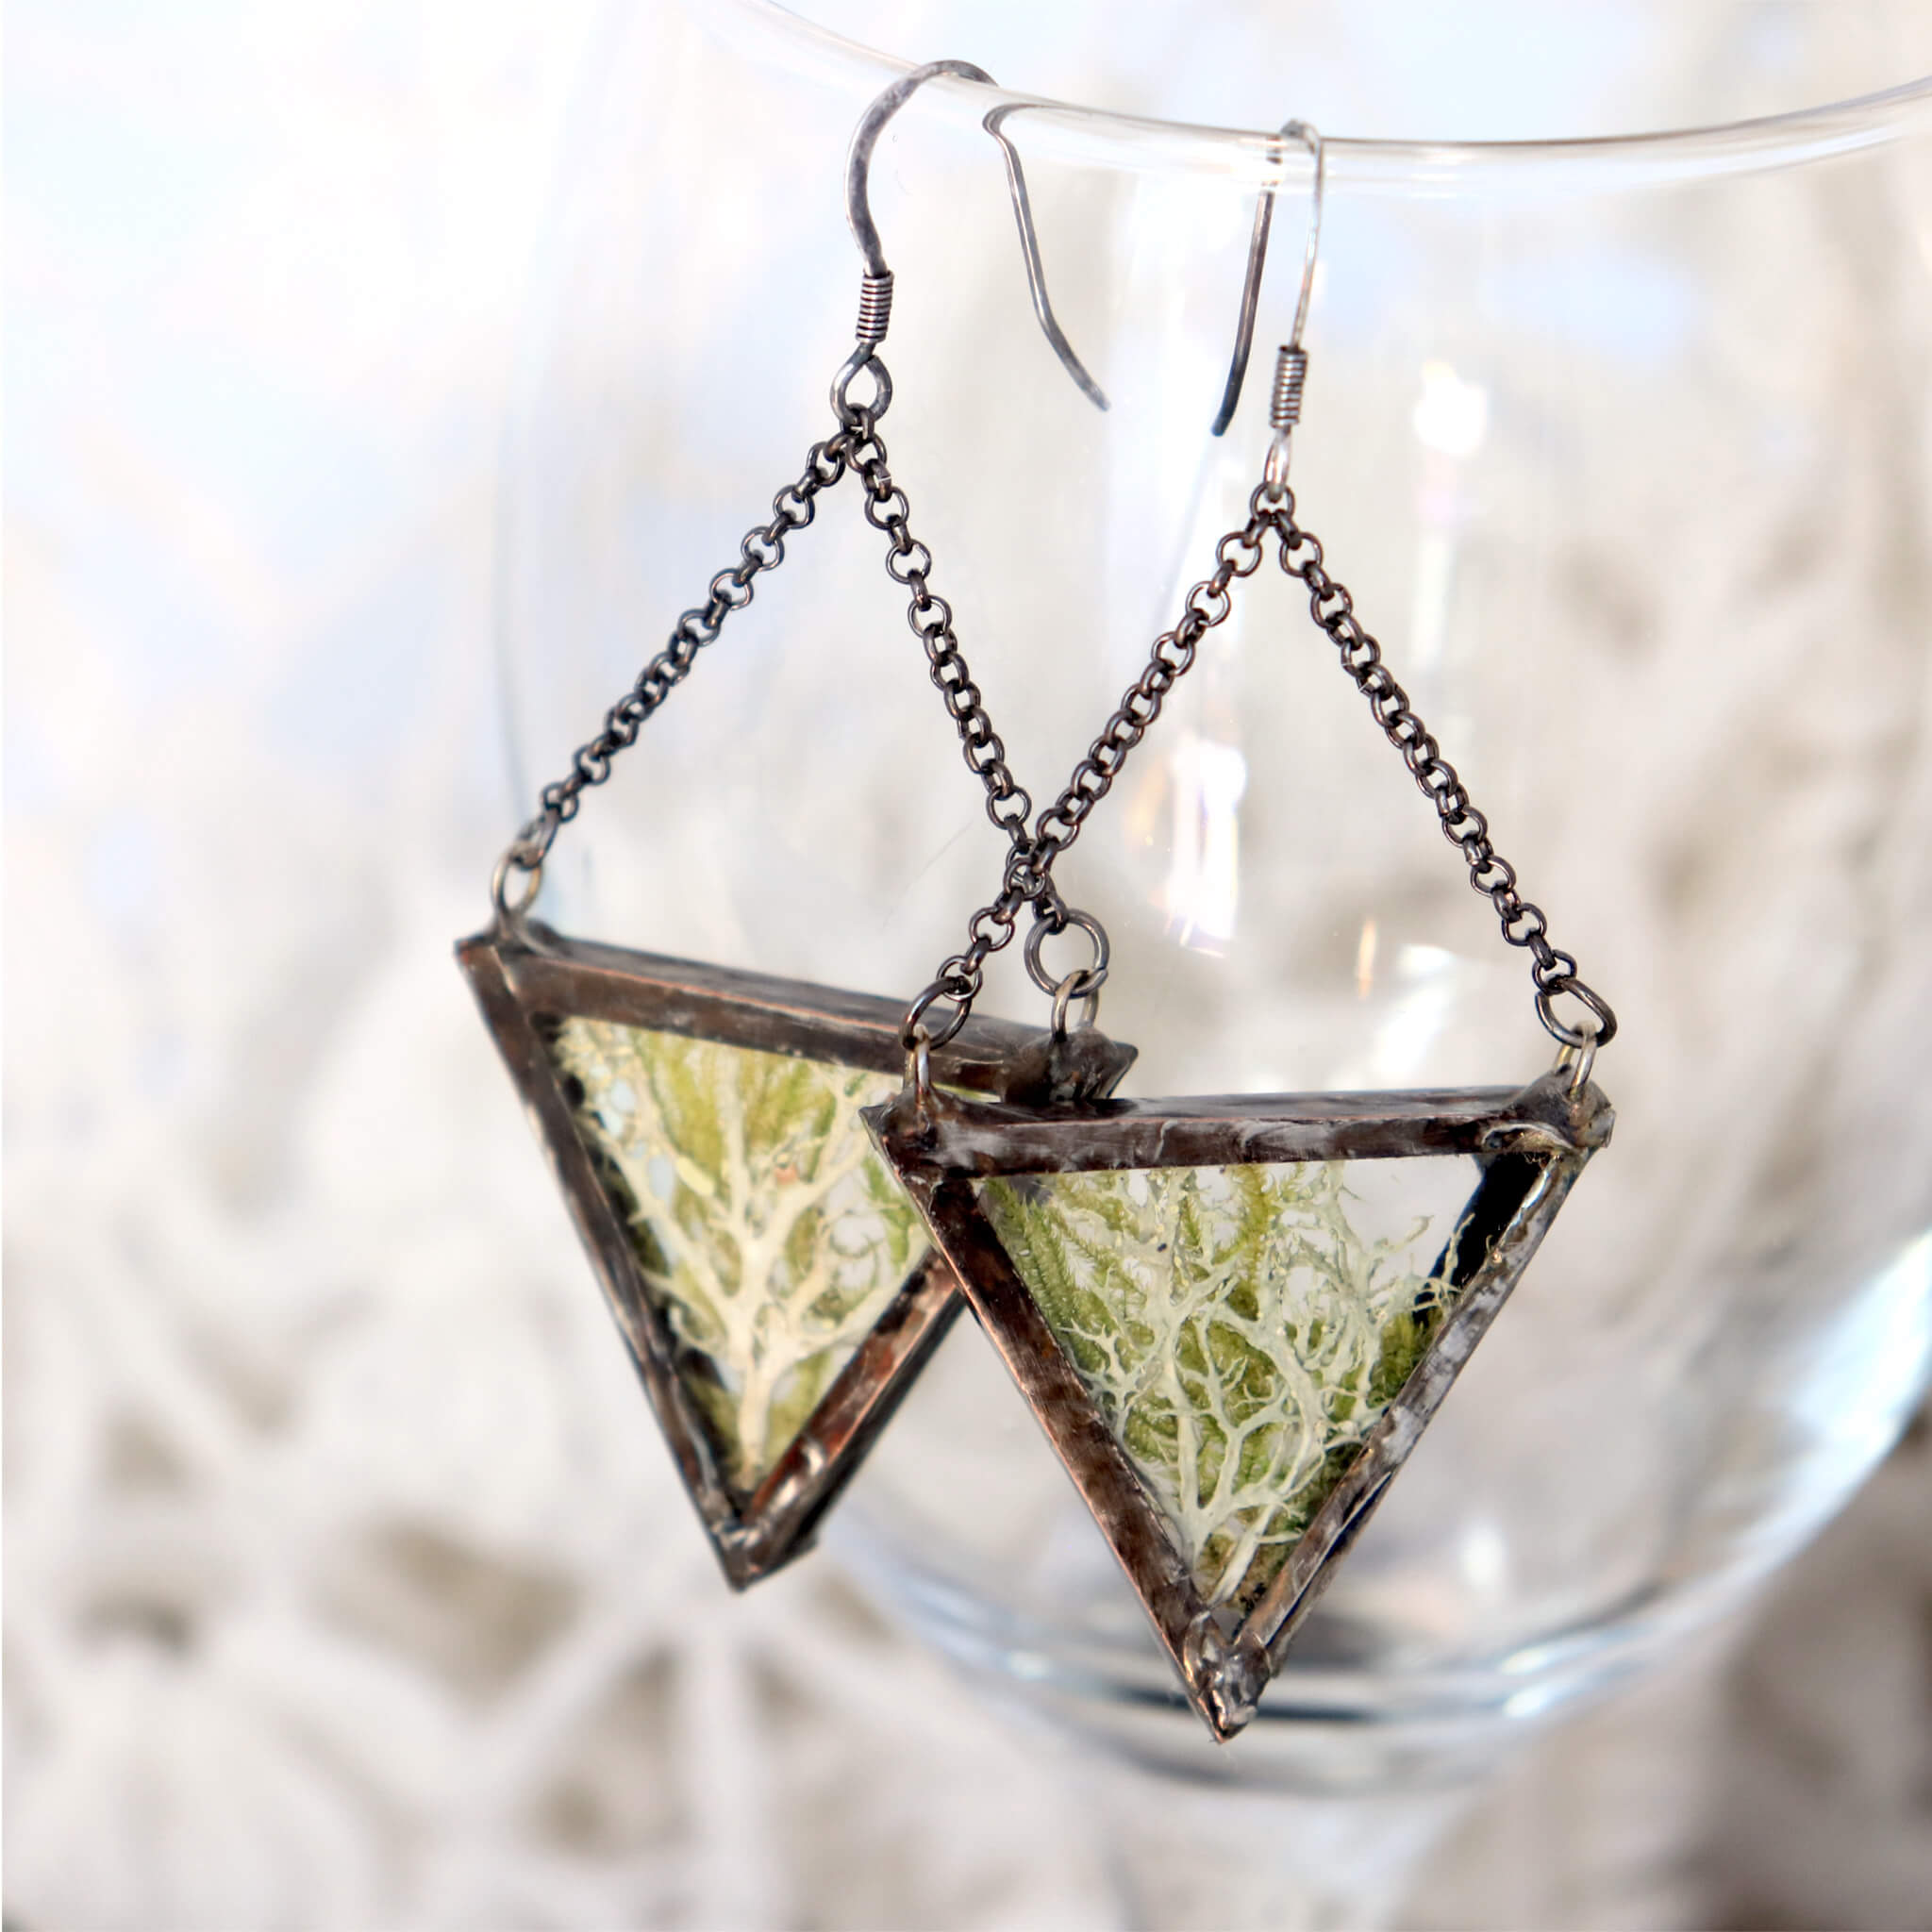 Triangular pressed moss and lichen earrings hanging from an edge of a glass